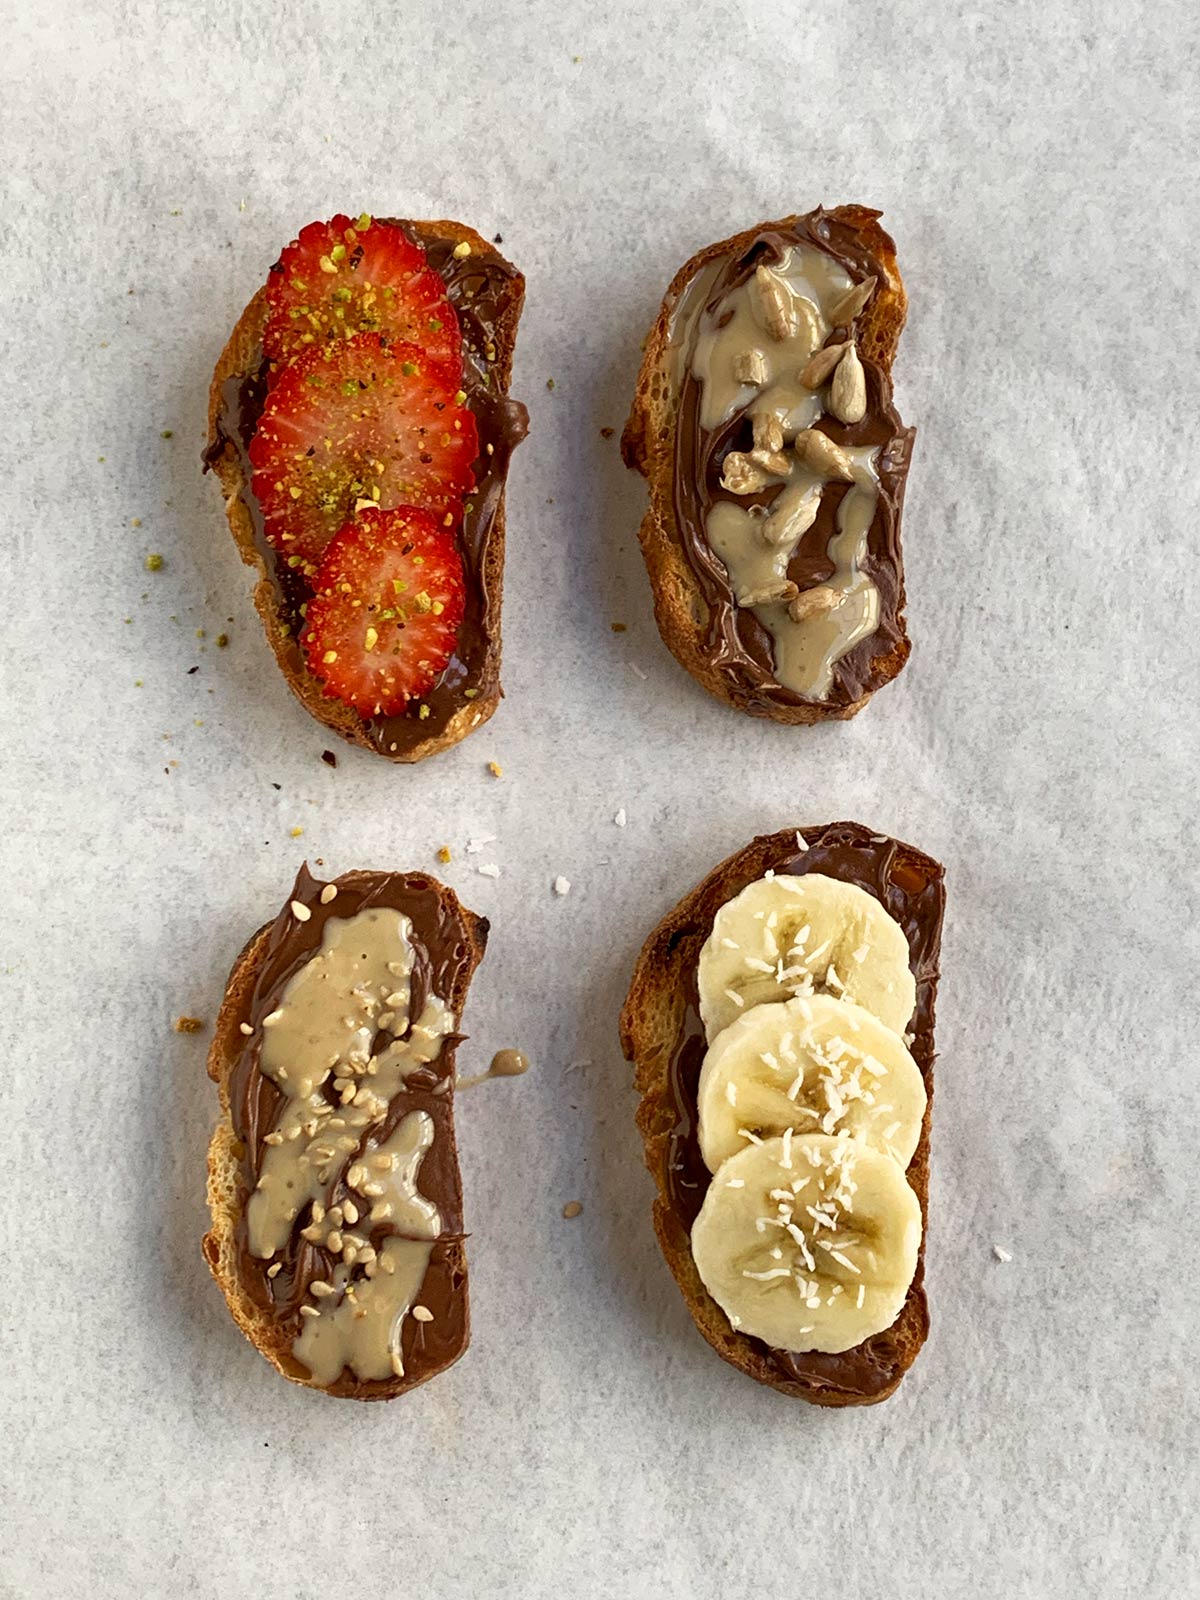 4 mini toasts with various toppings on the nutella.